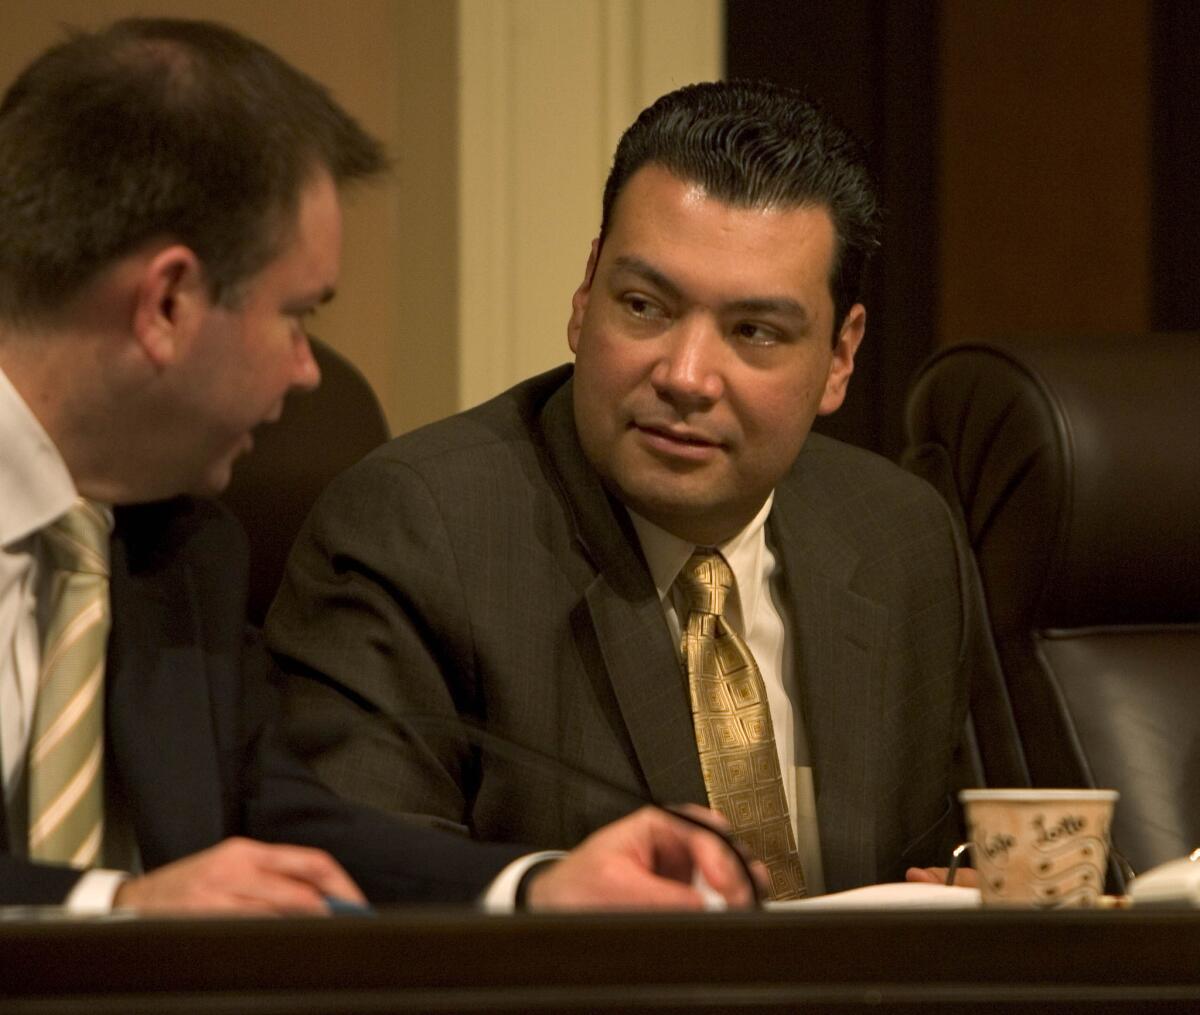 California Secretary of State Alex Padilla, then a state senator, listens to a staffer during a Rules Committee hearing in the Capitol on Jan. 10, 2007.